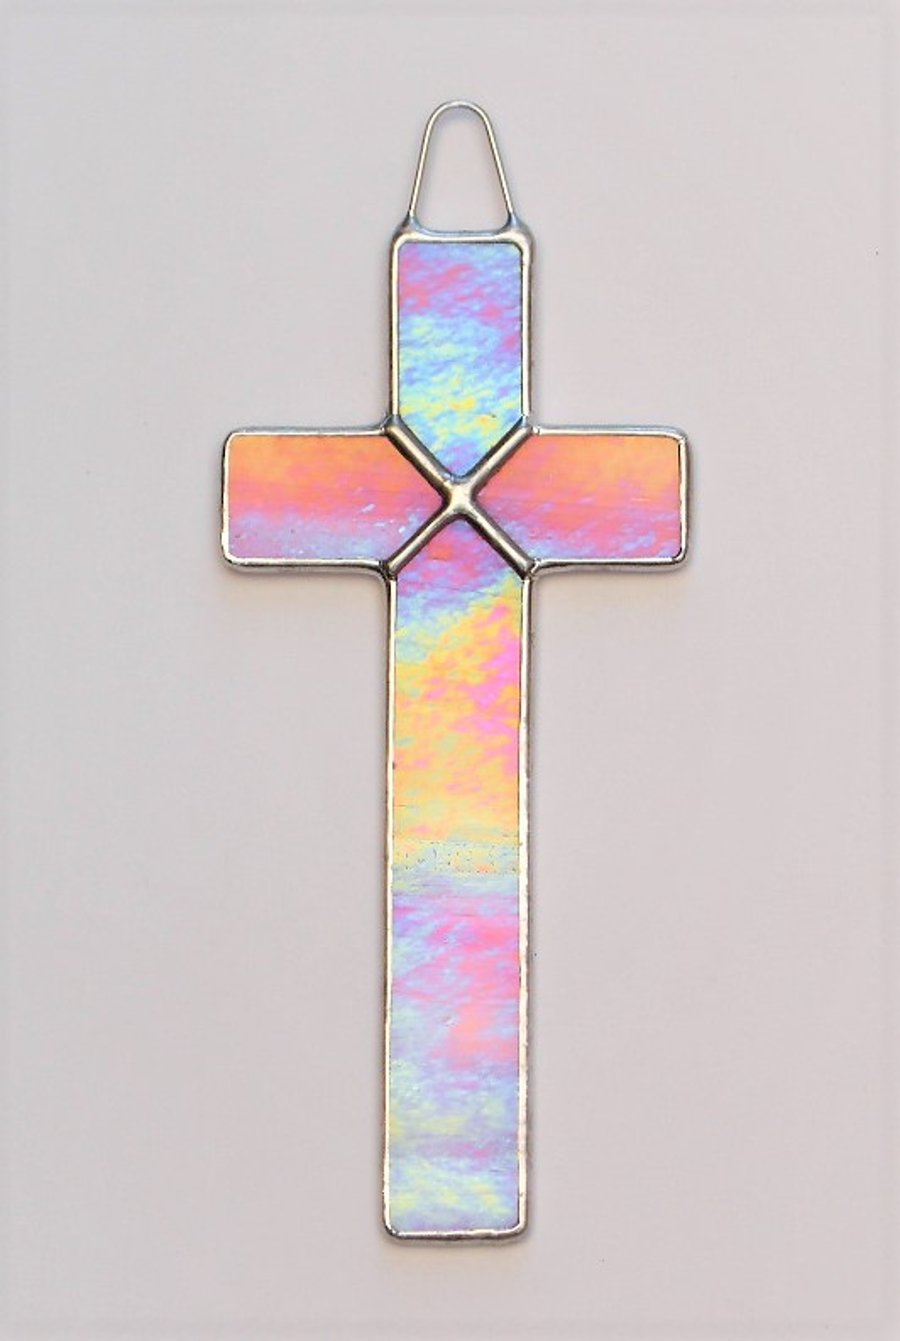 Stained Glass (Cross) in pink and white iridescent glass